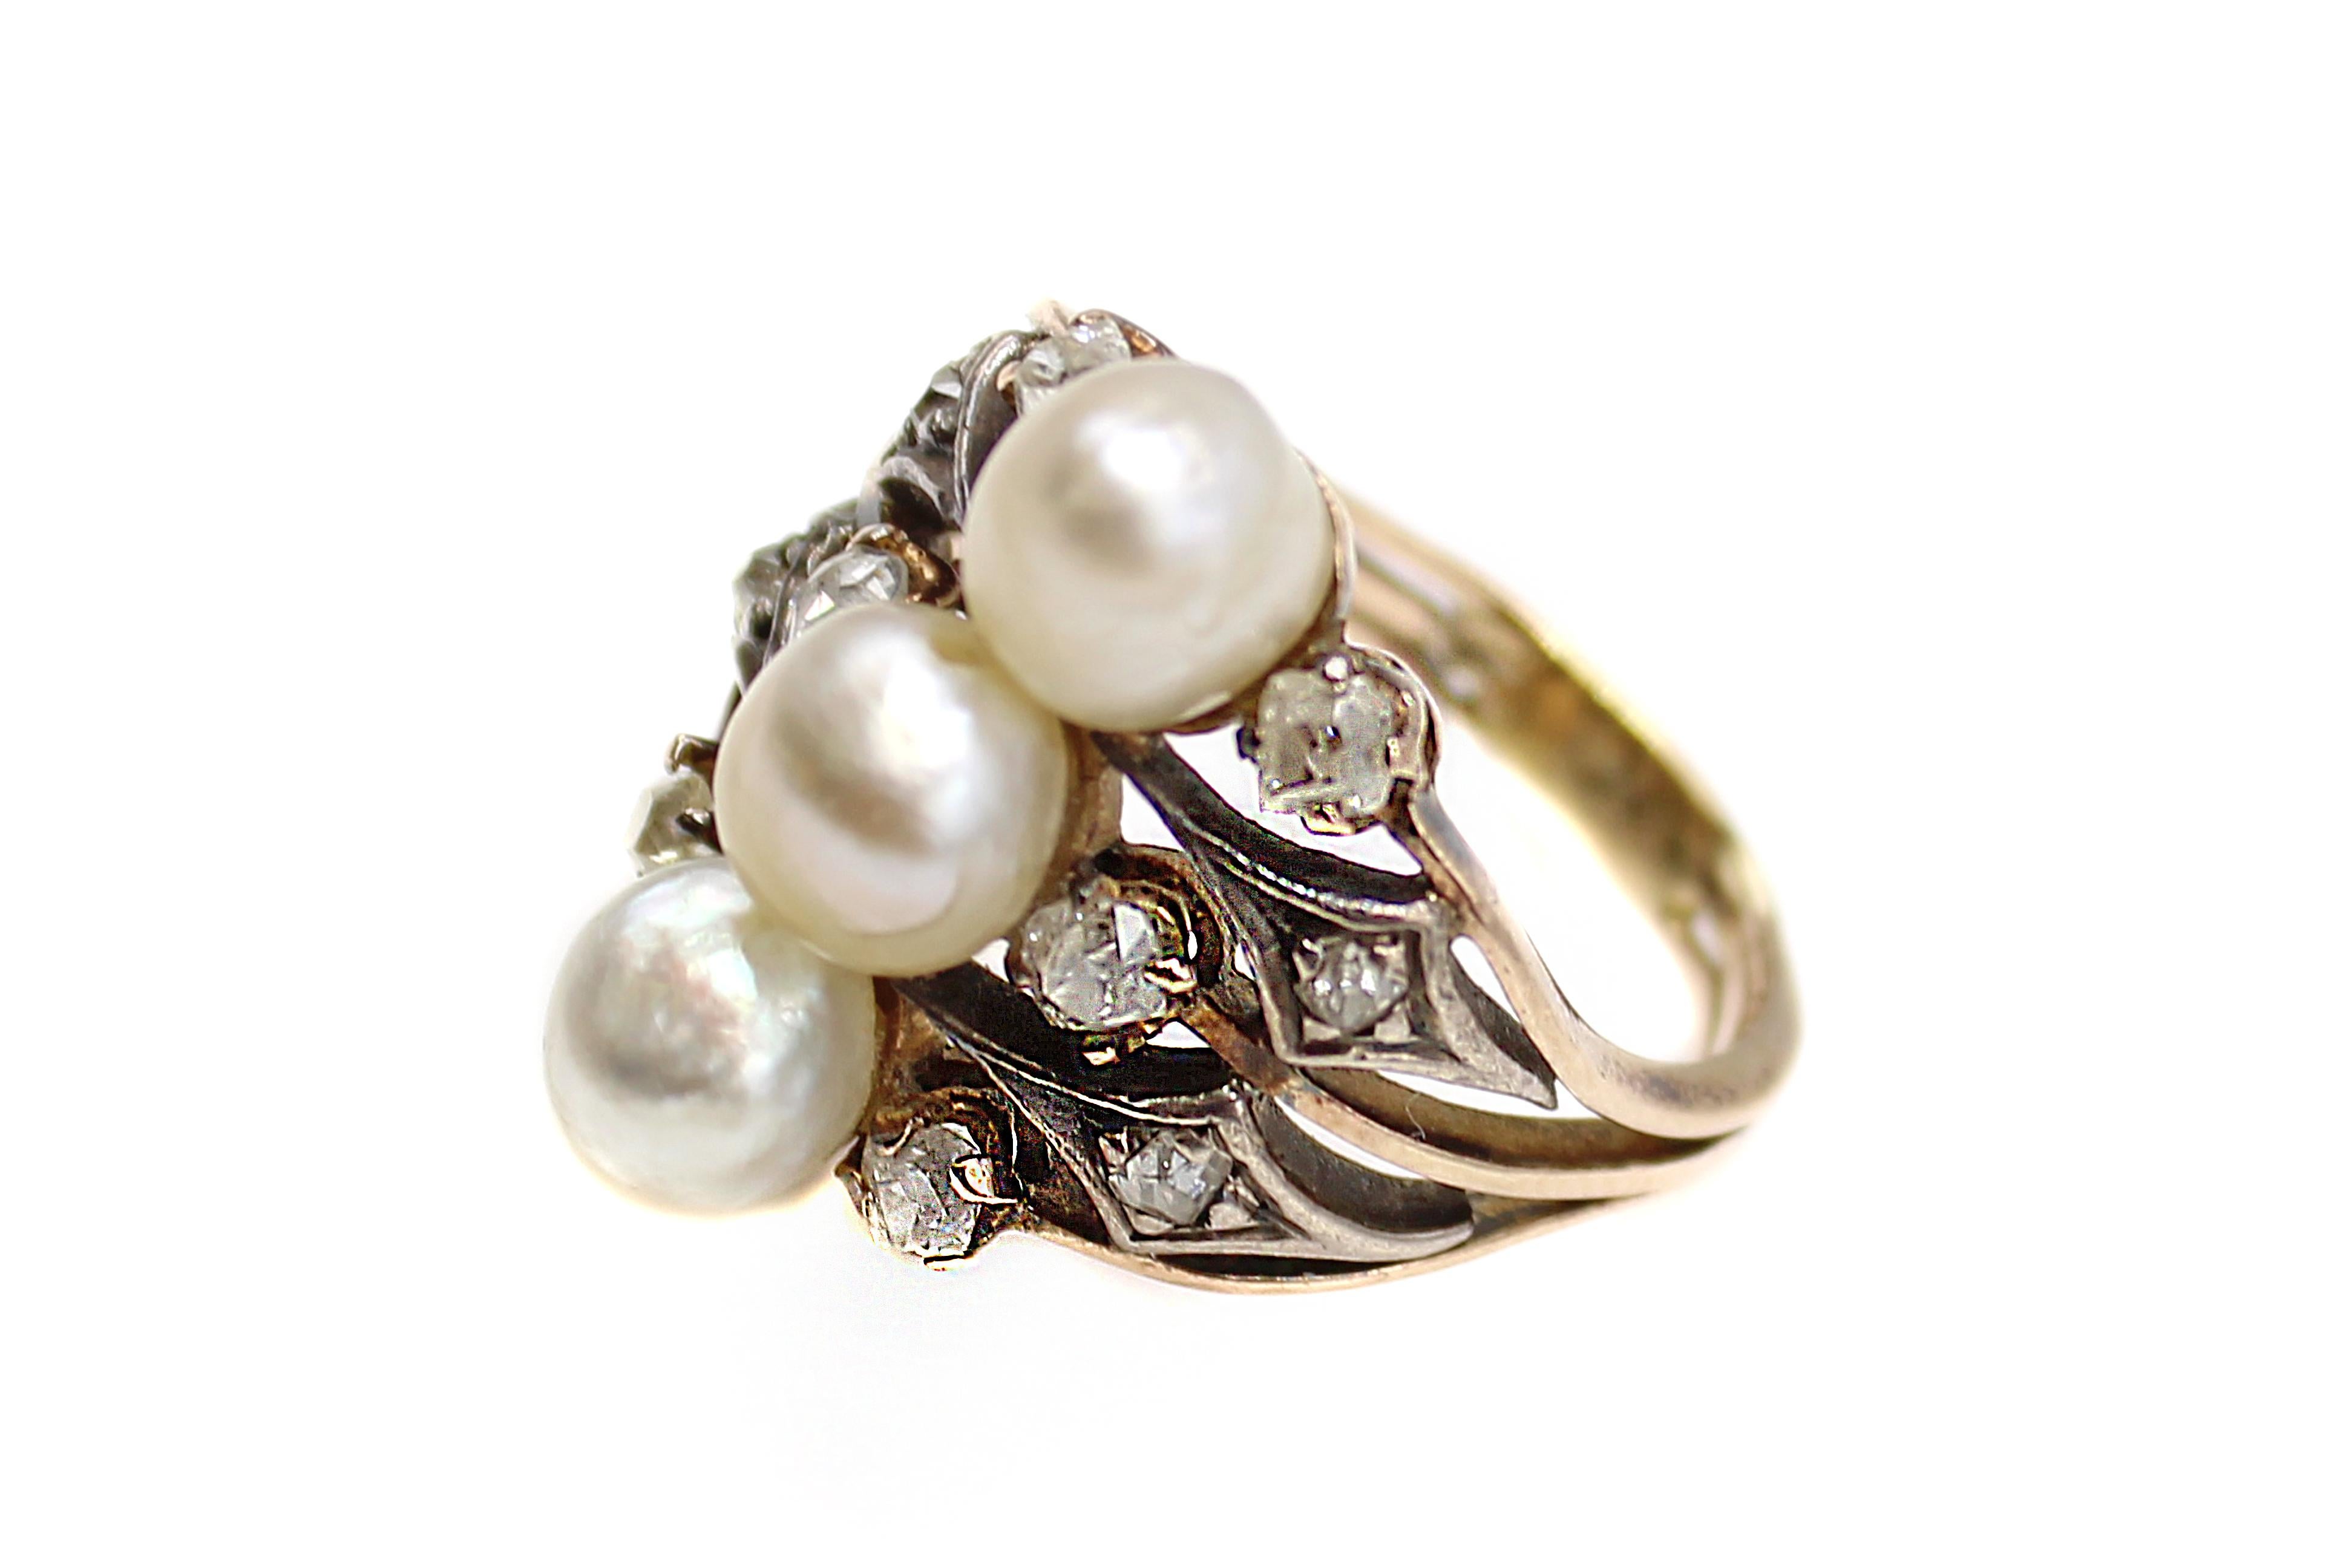 This charming Antique Victorian old cut diamond and pearl ring from ca. 1870 is gorgeous was beautifully hand-crafted in silver topped gold which was customary in this period. Three slightly baroque pearls, set up and down the finger are the center